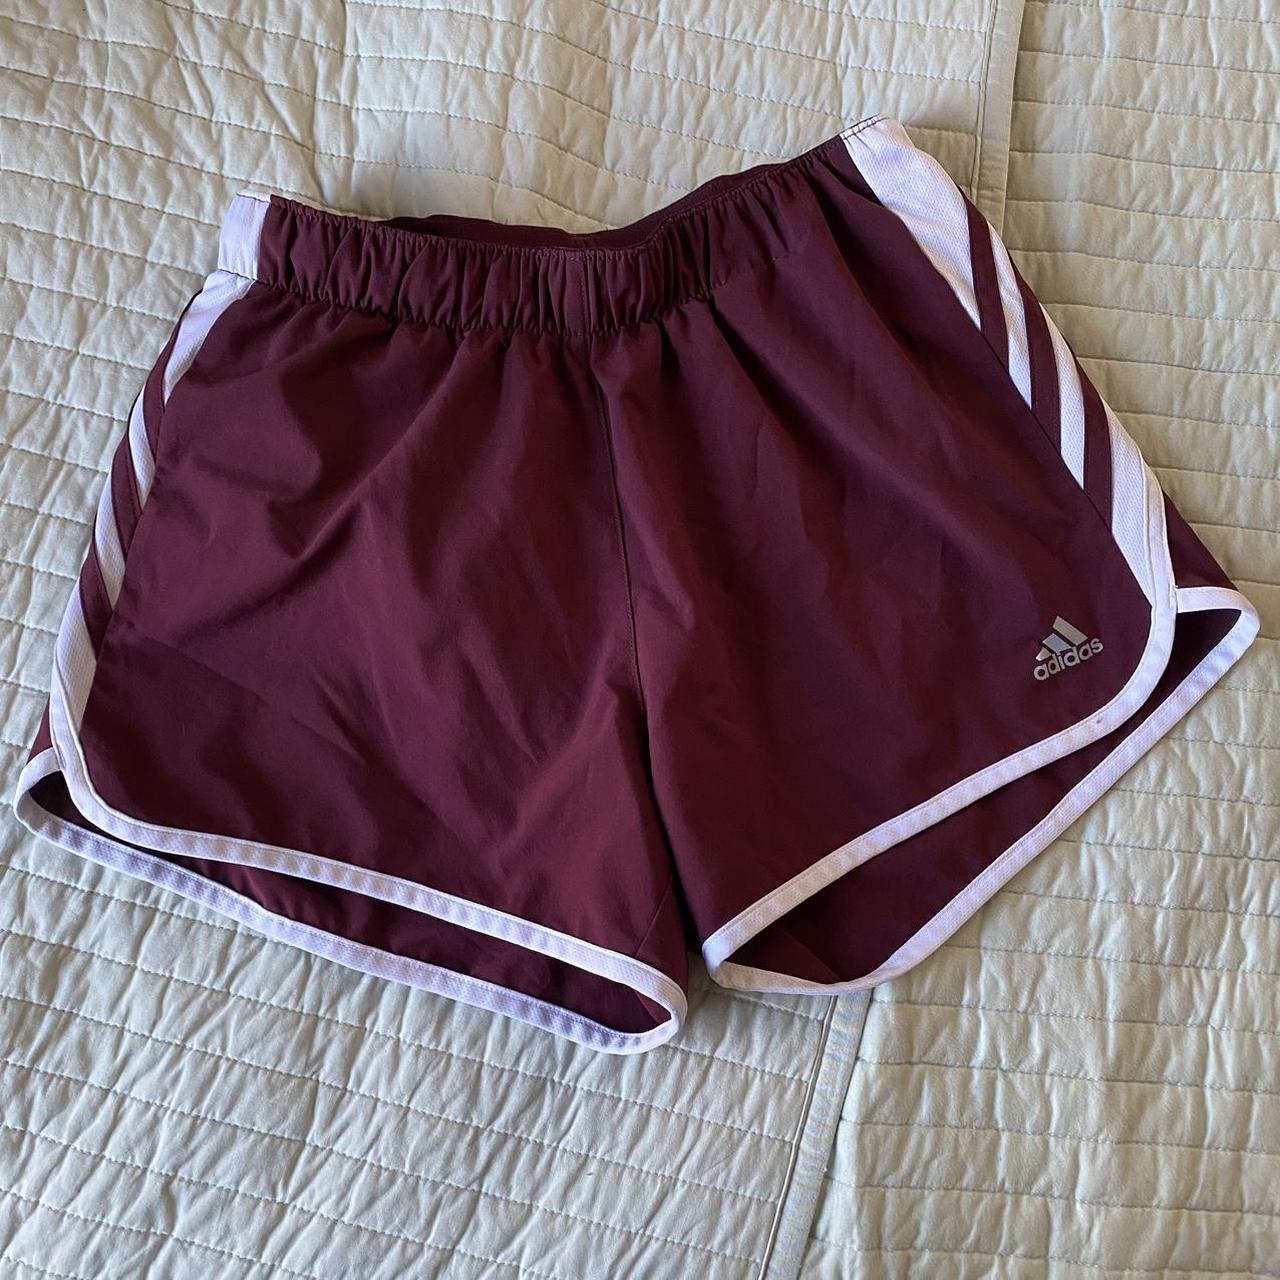 Red adidas athletic shorts -perfect condition -size xs - Depop